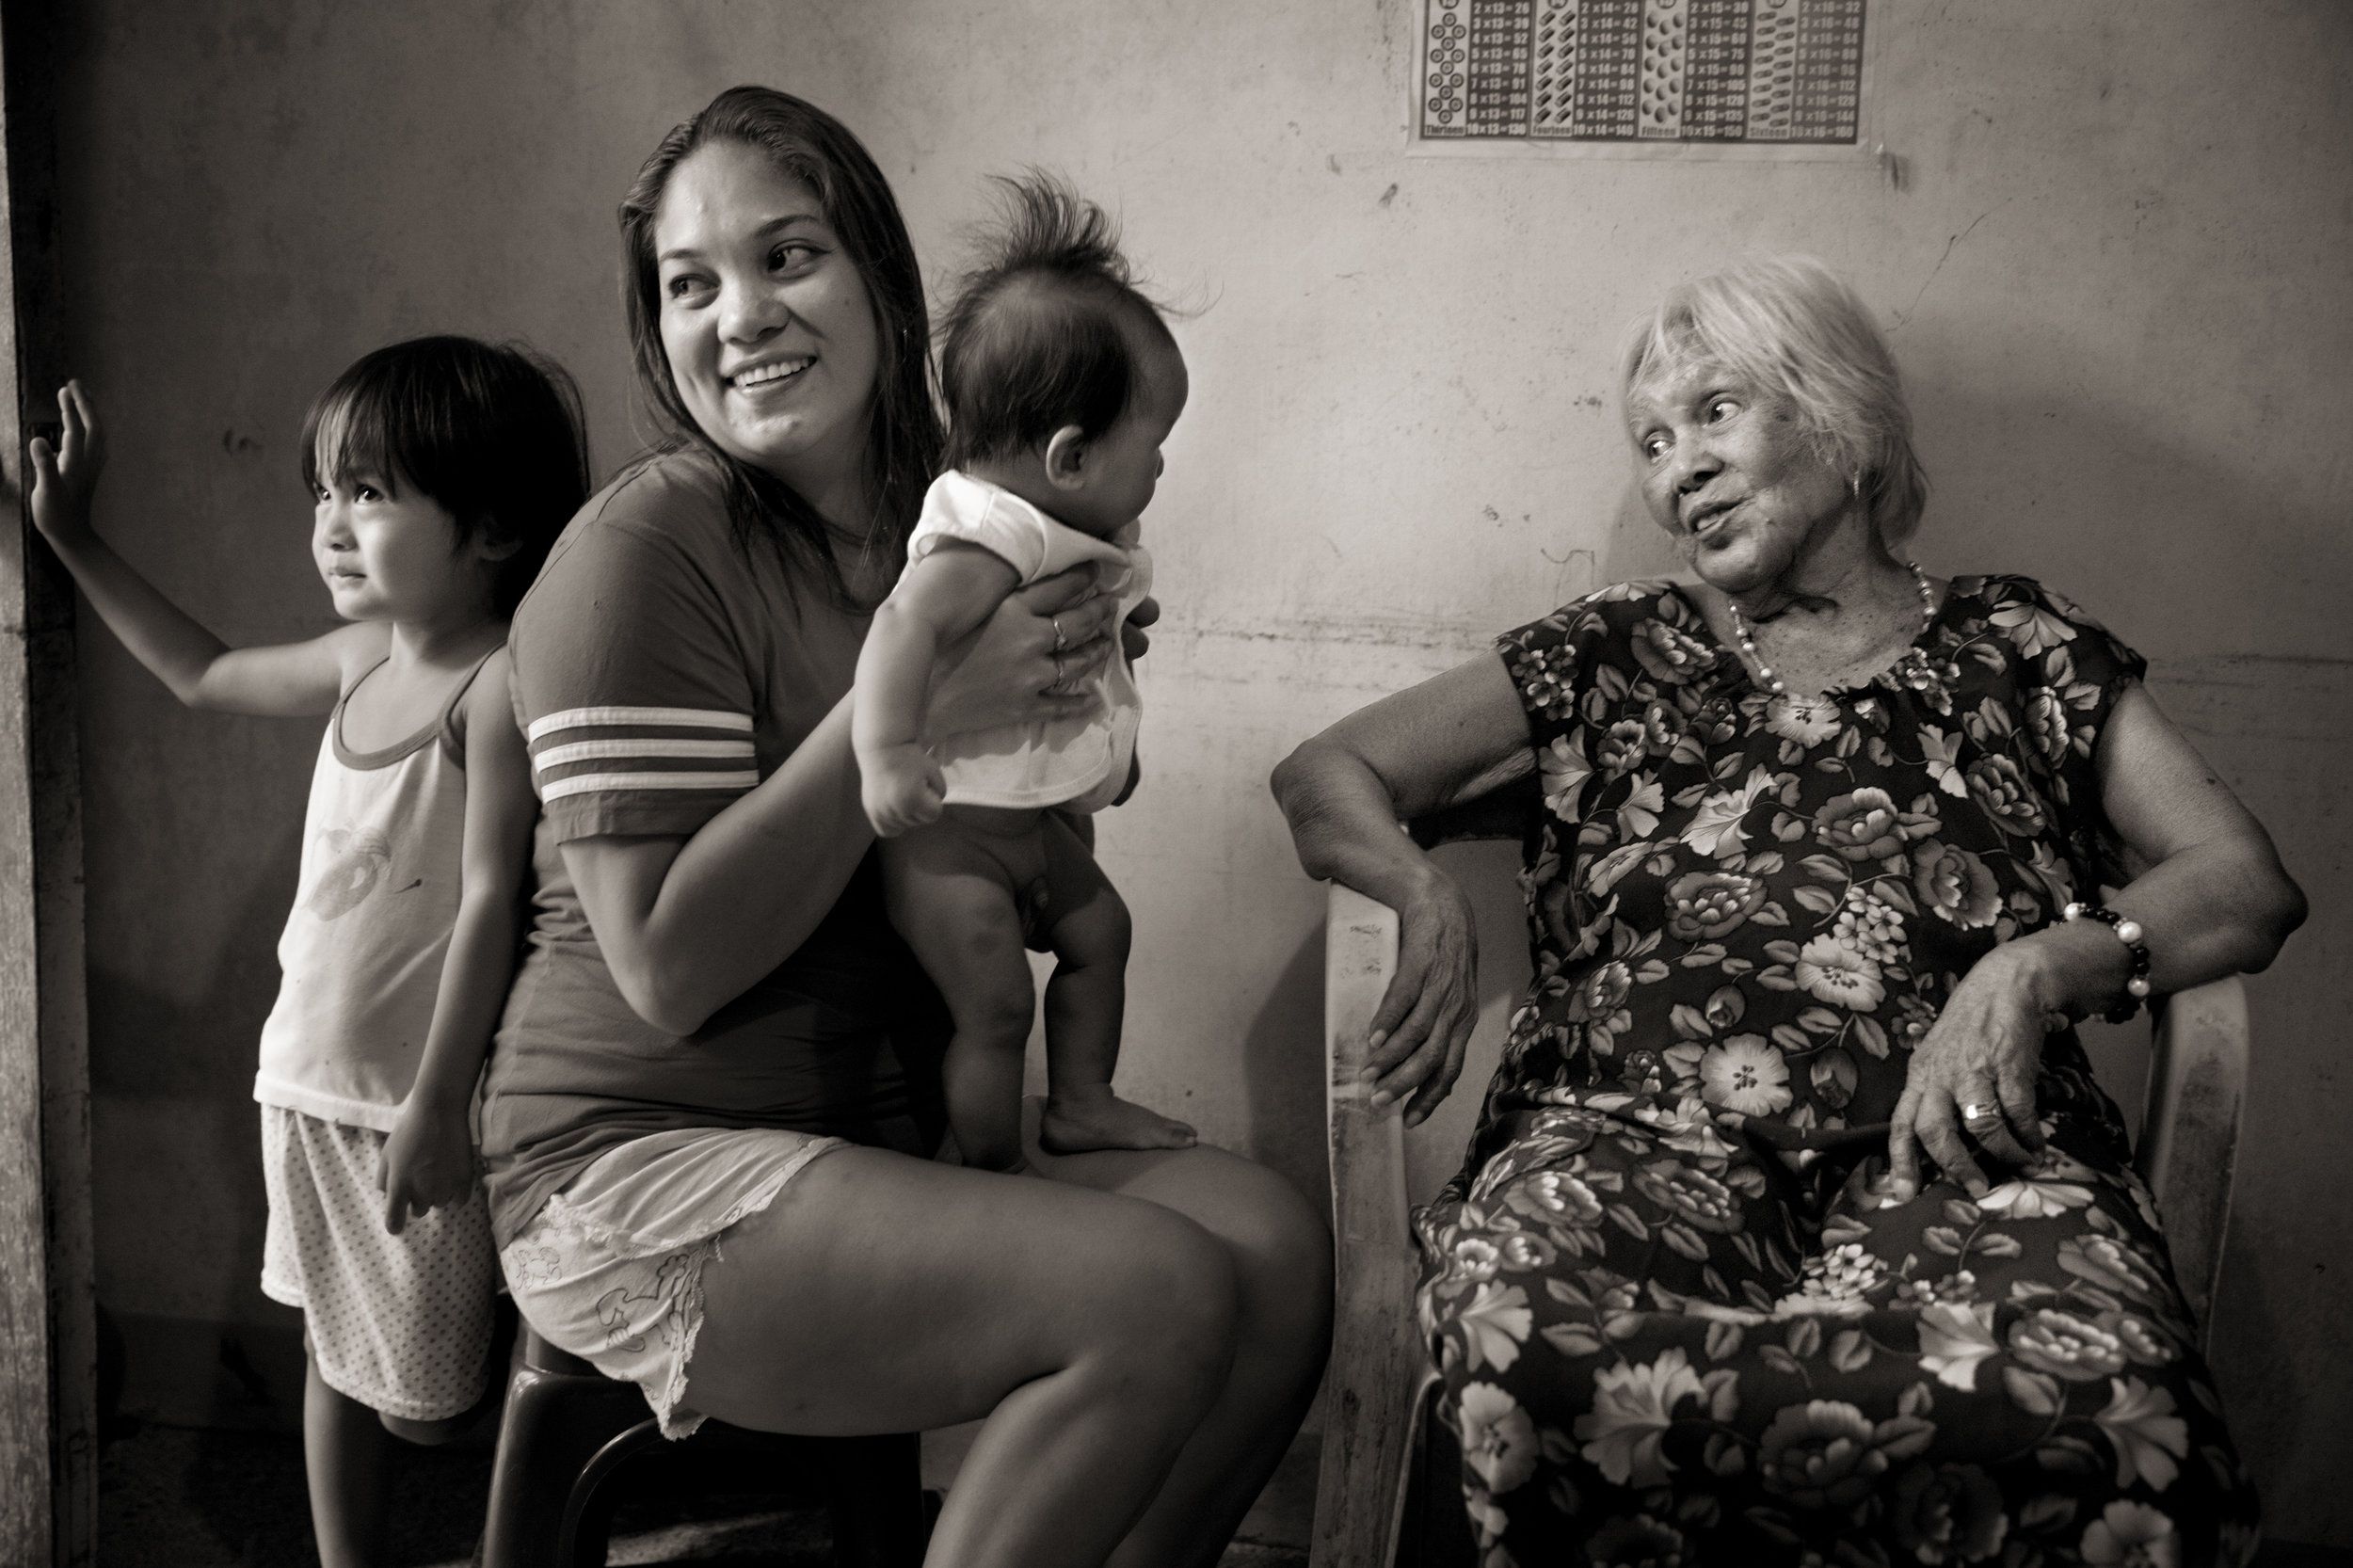 After singing for soldiers, Felicidad delos Reyes (right) was selected to "receive a gift" at the garrison behind her school. She was locked in a room; later five soldiers jumped on her, held her down and beat her into submission as they took turns raping her. Here, she is photographed with her great-granddaughter Lia Maglanit, great-grandson Elijah Maglanit and granddaughter Jonalyn Patiman. Image by Cheryl Diaz Meyer. Philippines, 2019.